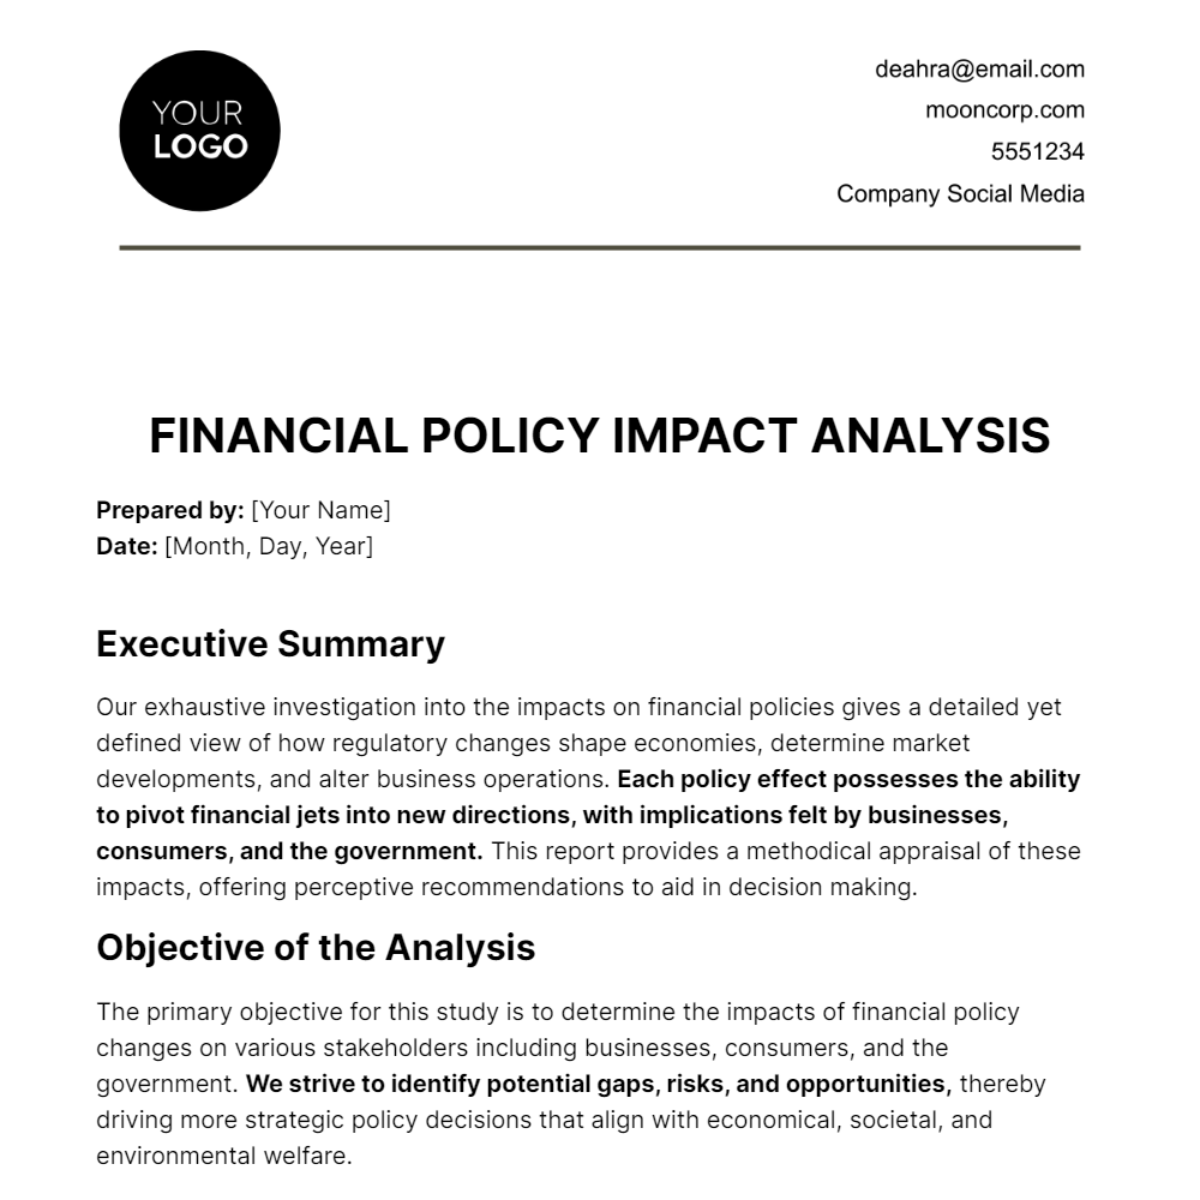 Financial Policy Impact Analysis Template